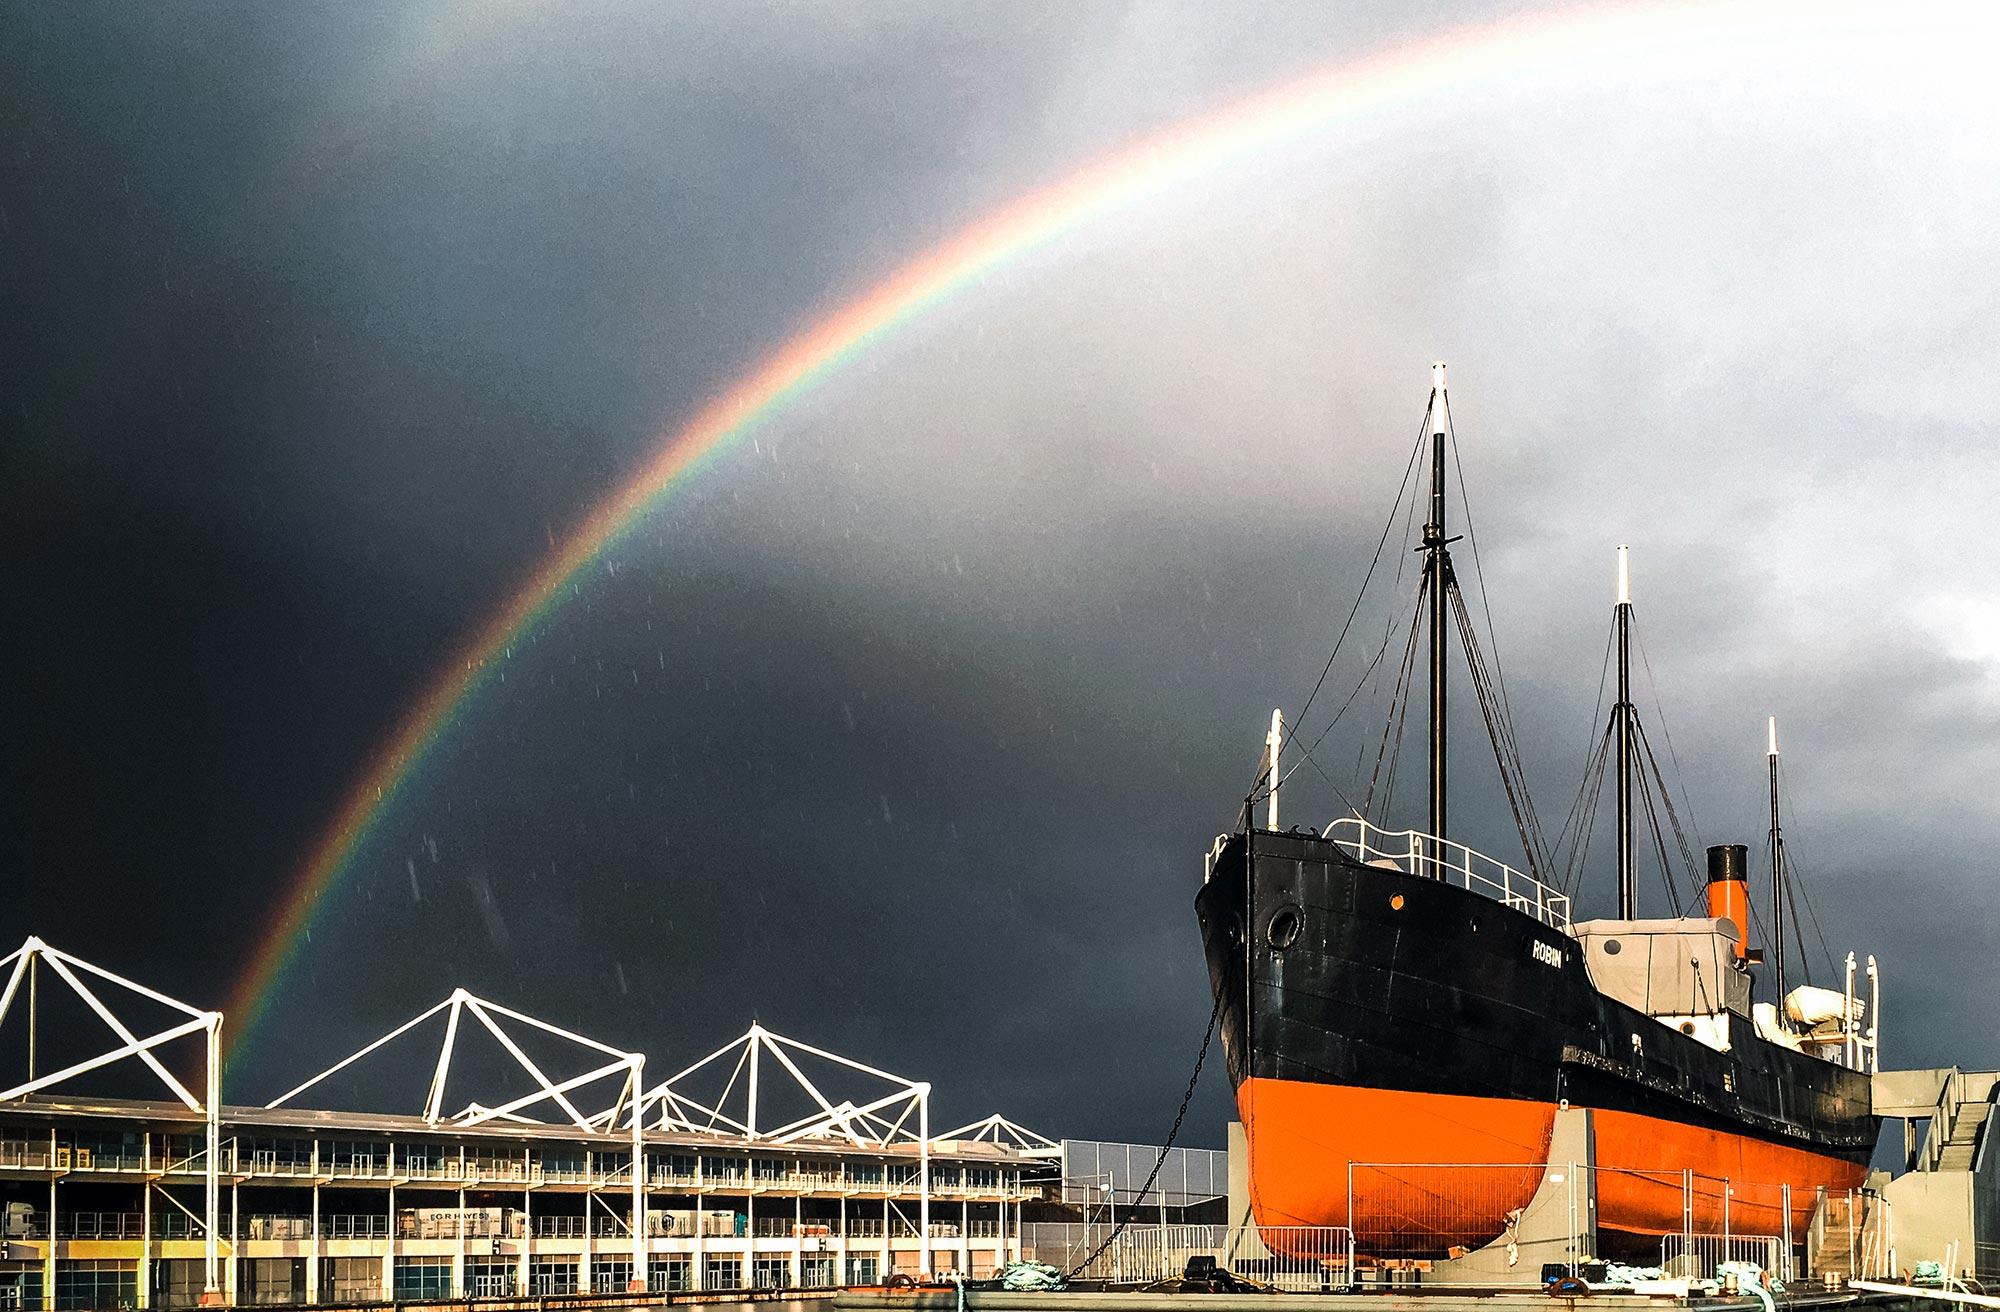 SS Robin in the Royal Docks with a rainbow in the sky